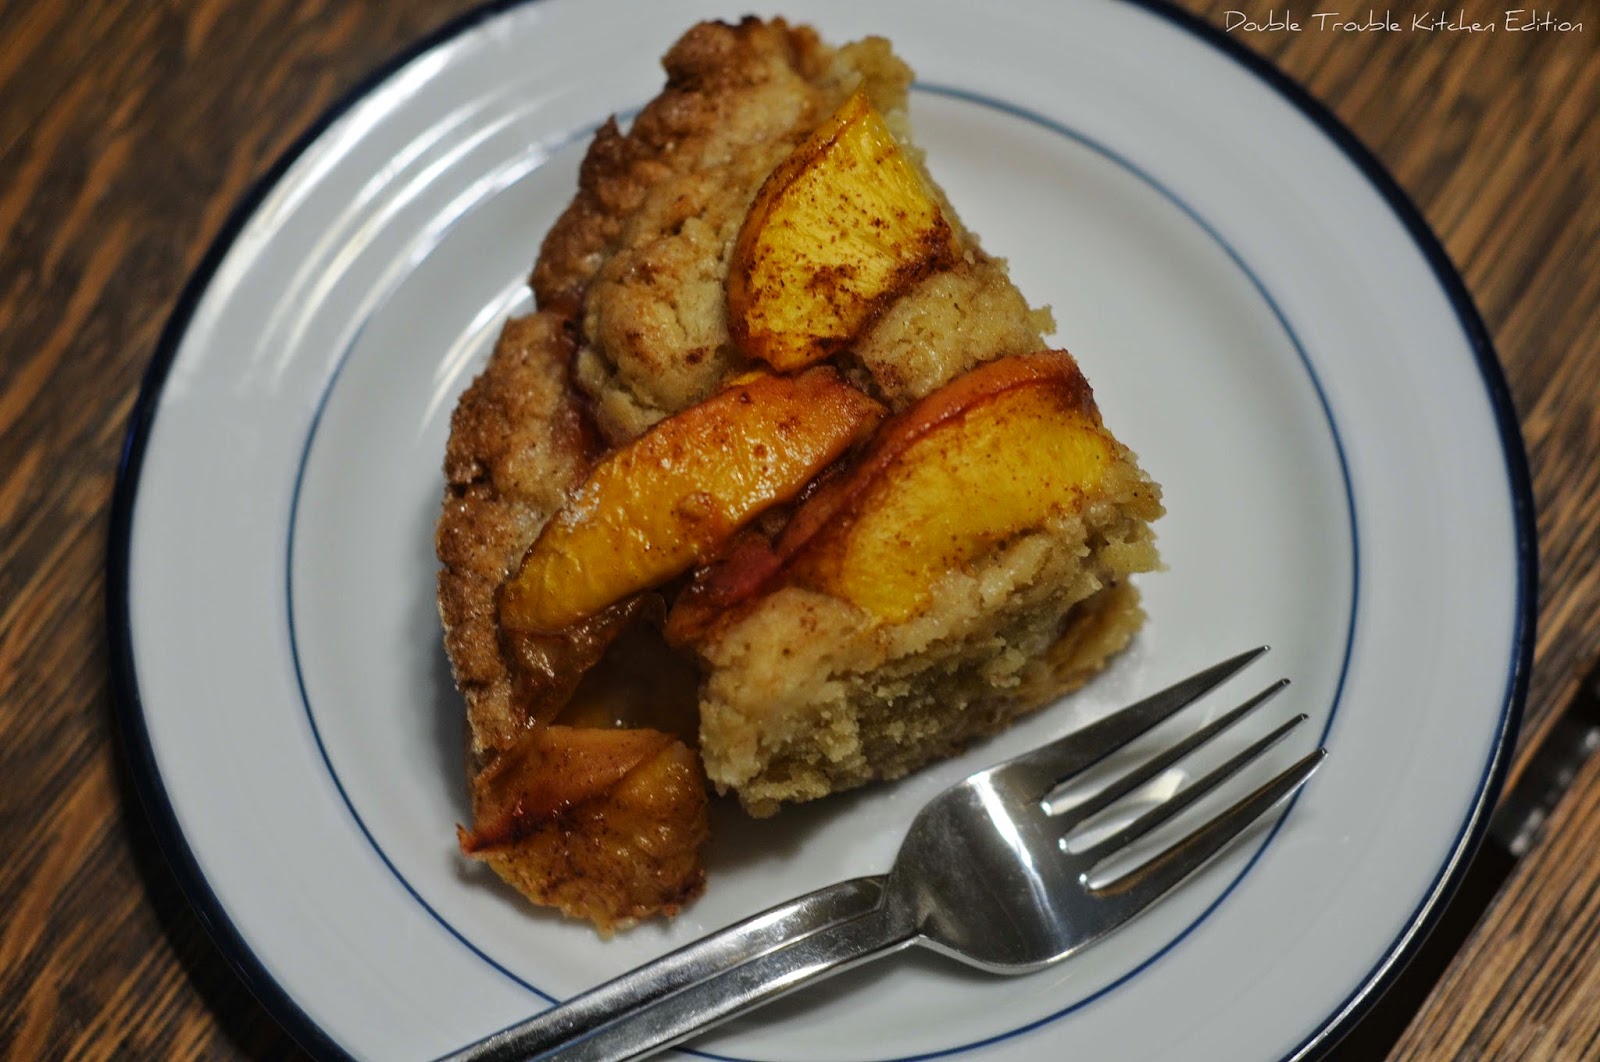 Double Trouble Kitchen Edition: Peach Cake